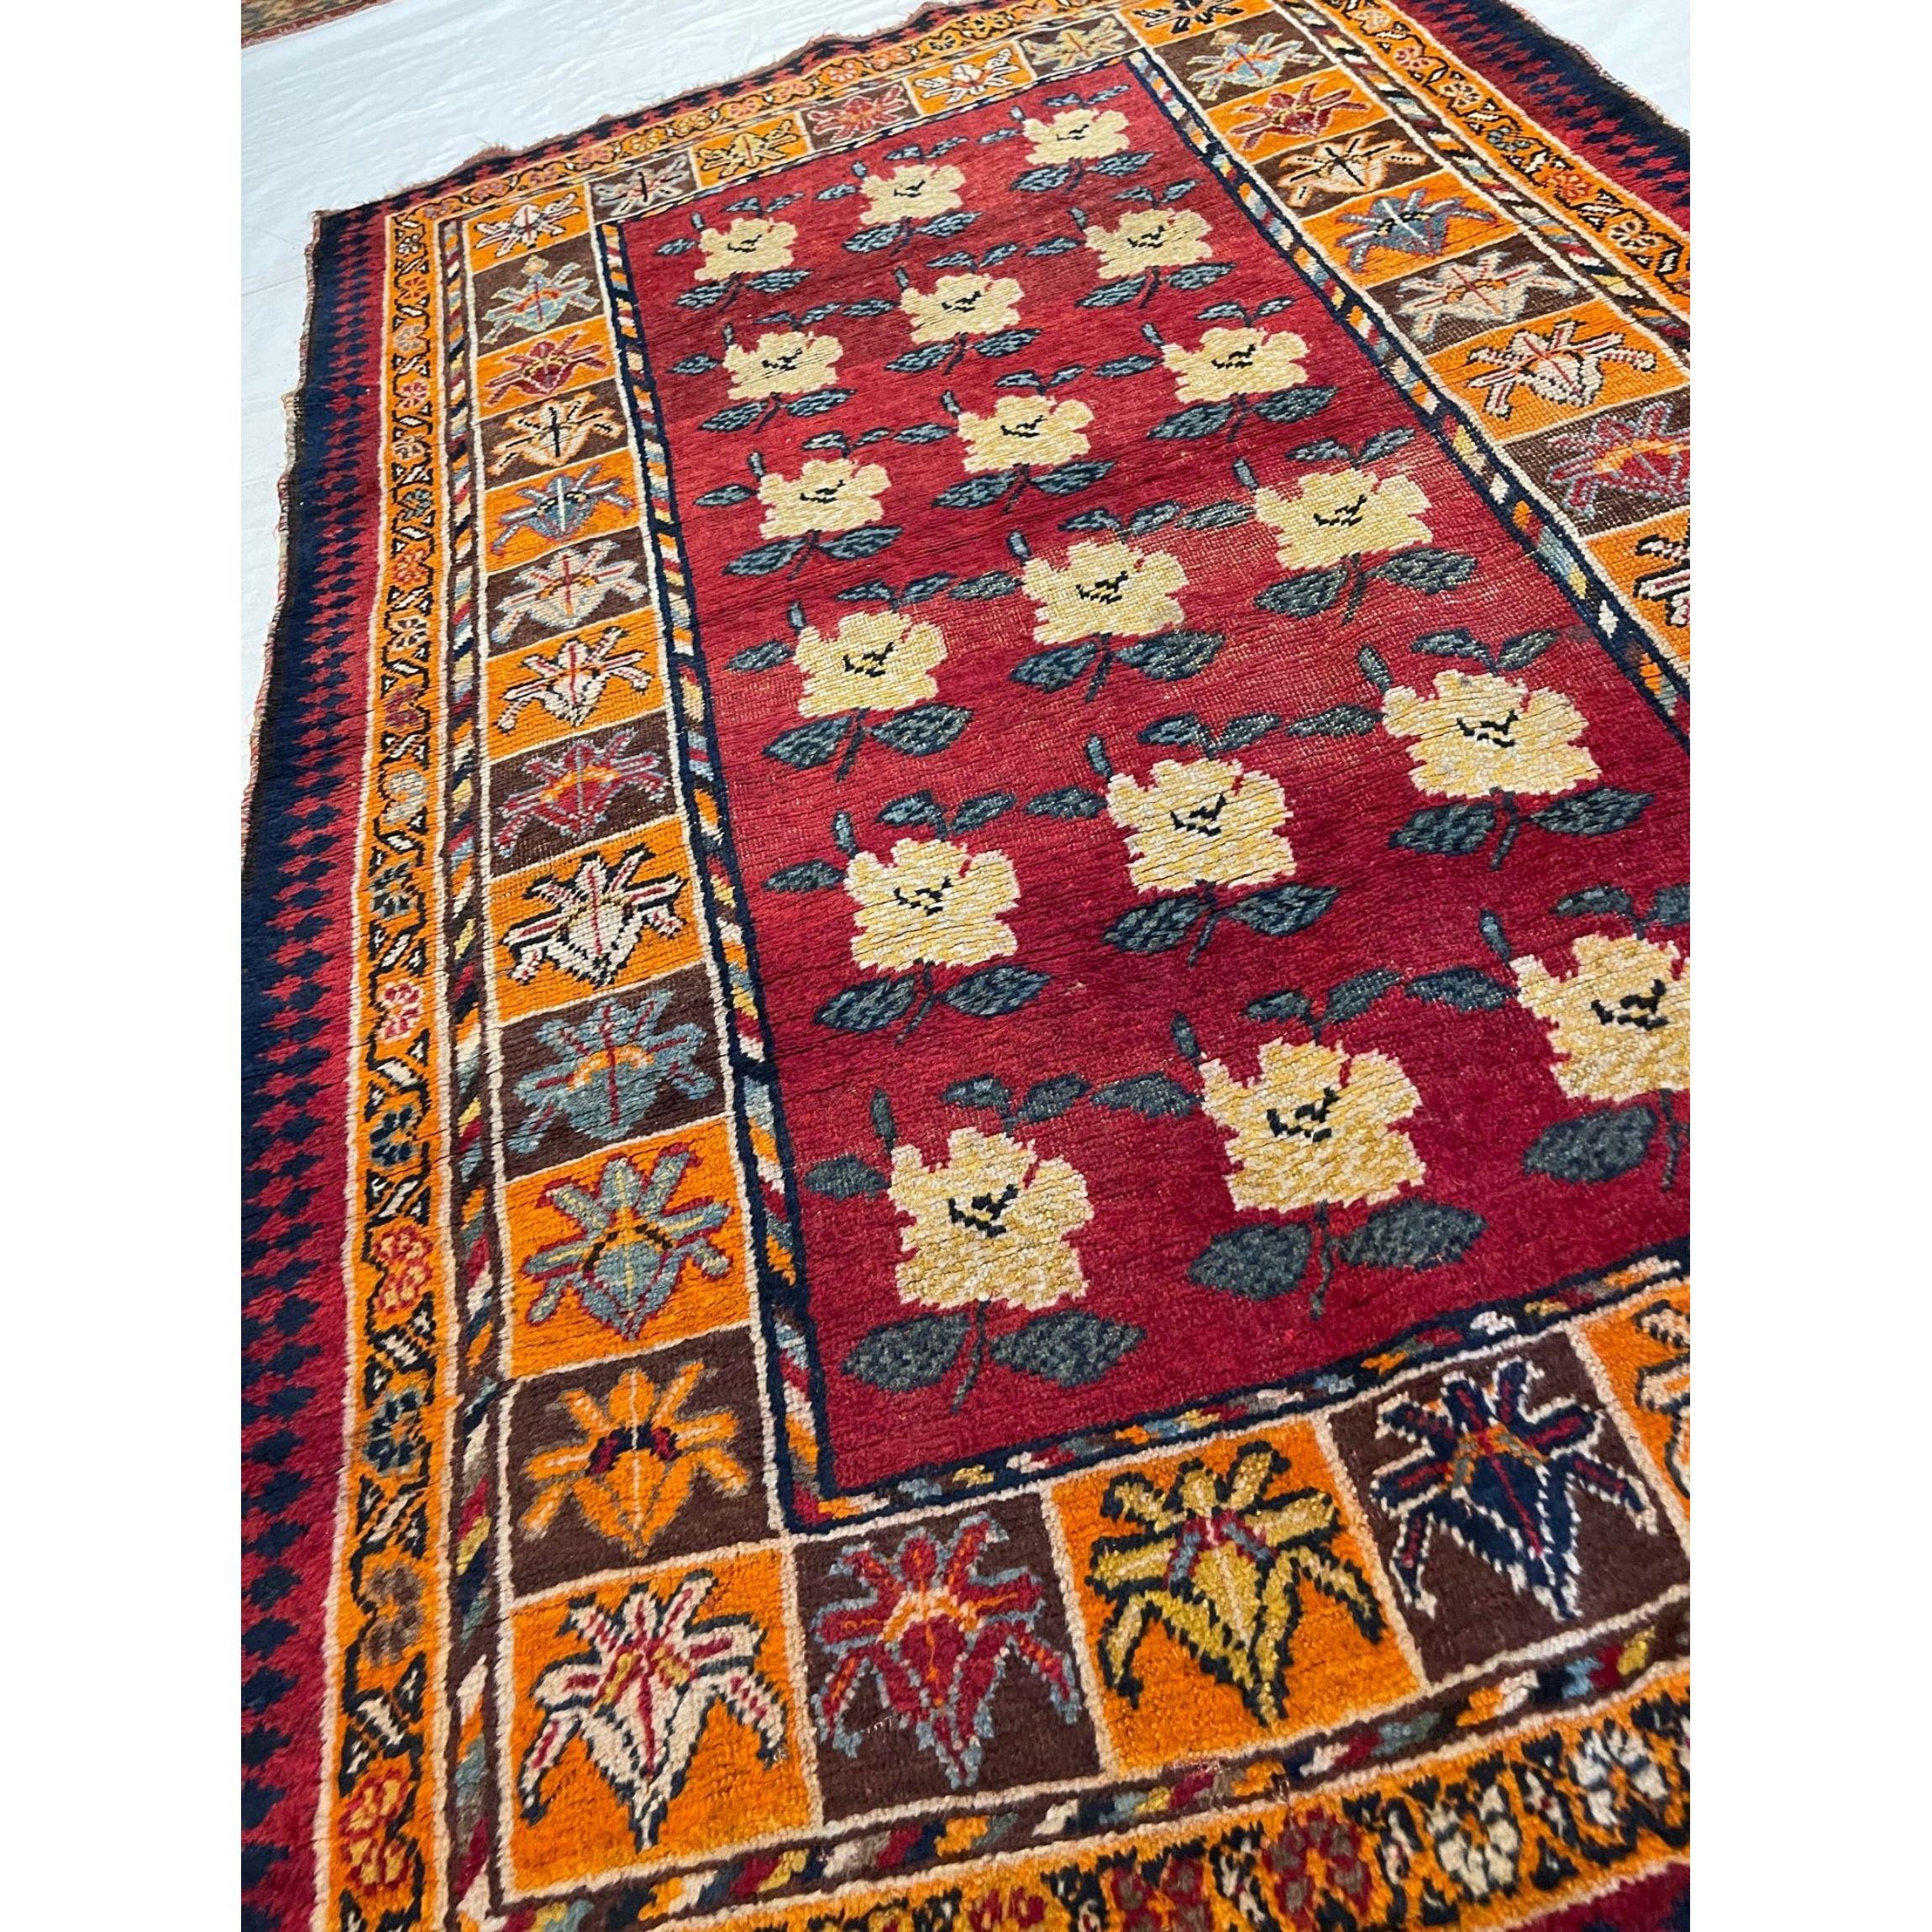 Persian Gabbeh Rugs – Persian rugs made with extra high pile and very simple, graphic designs focused on the use of color, which can be vibrant or soft and earthy. As pieces made for domestic use rather than commercial value in the marketplace,